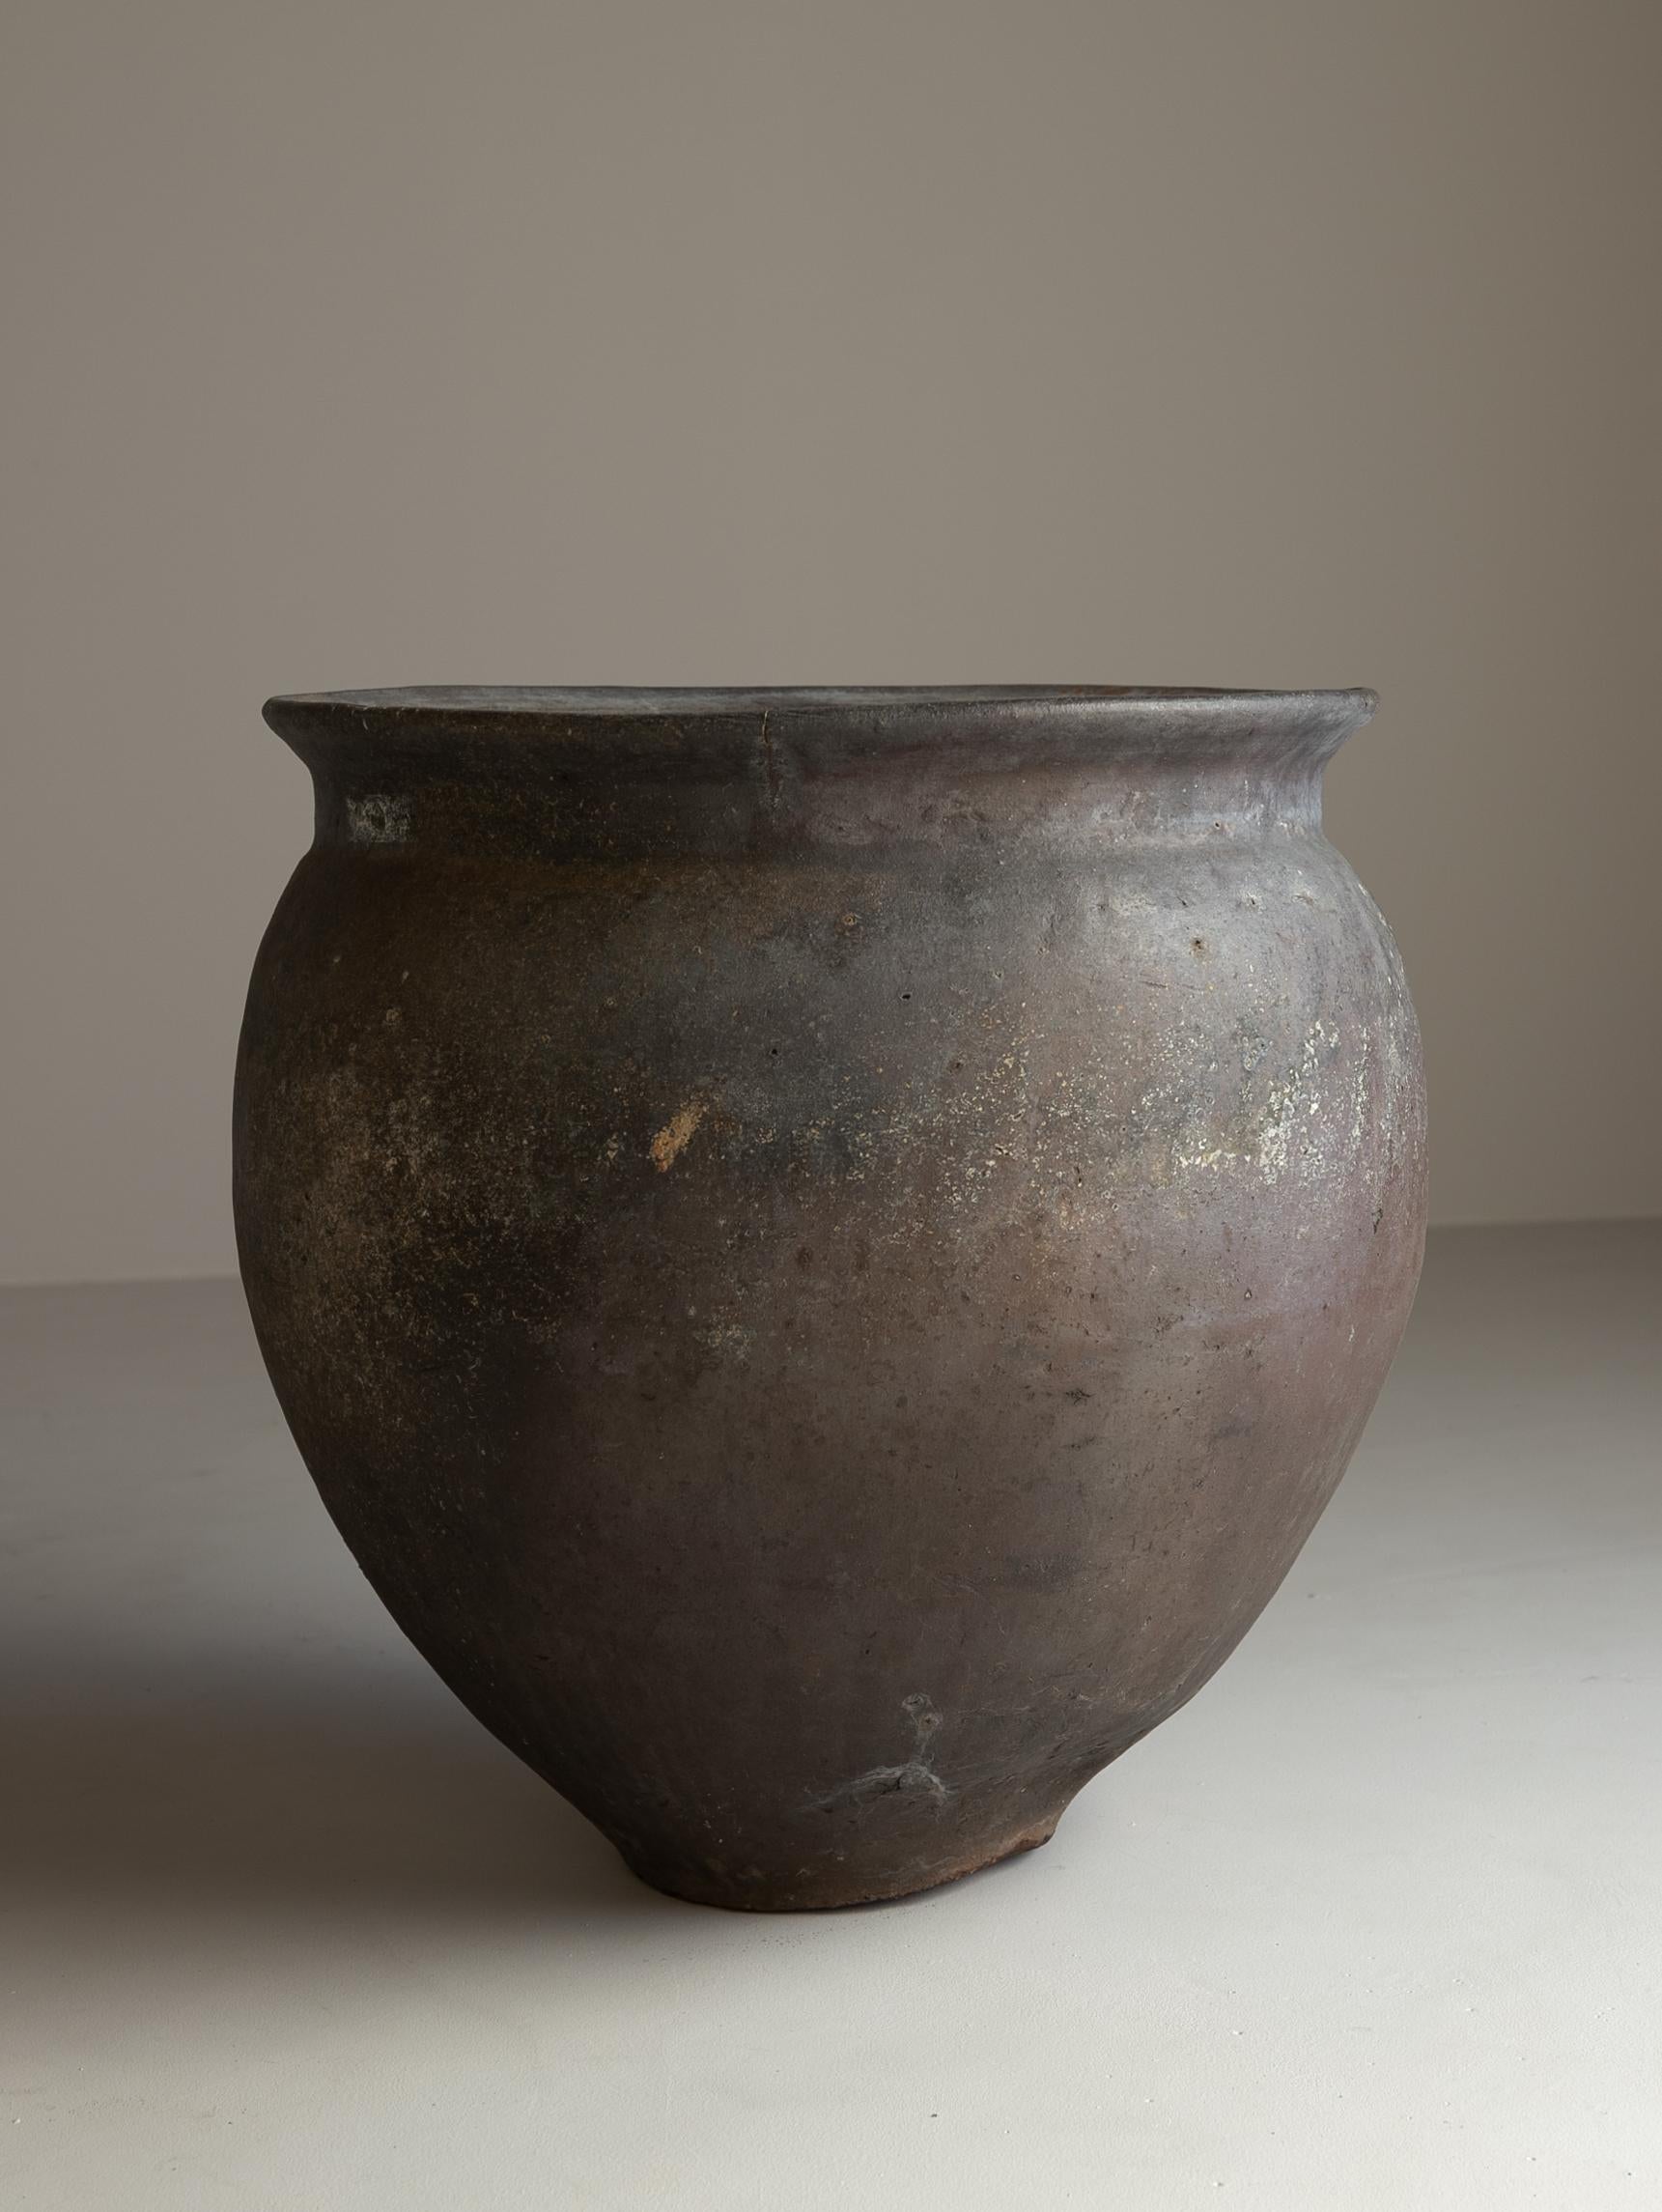 This pot is fired in Aichi prefecture.
It is called 